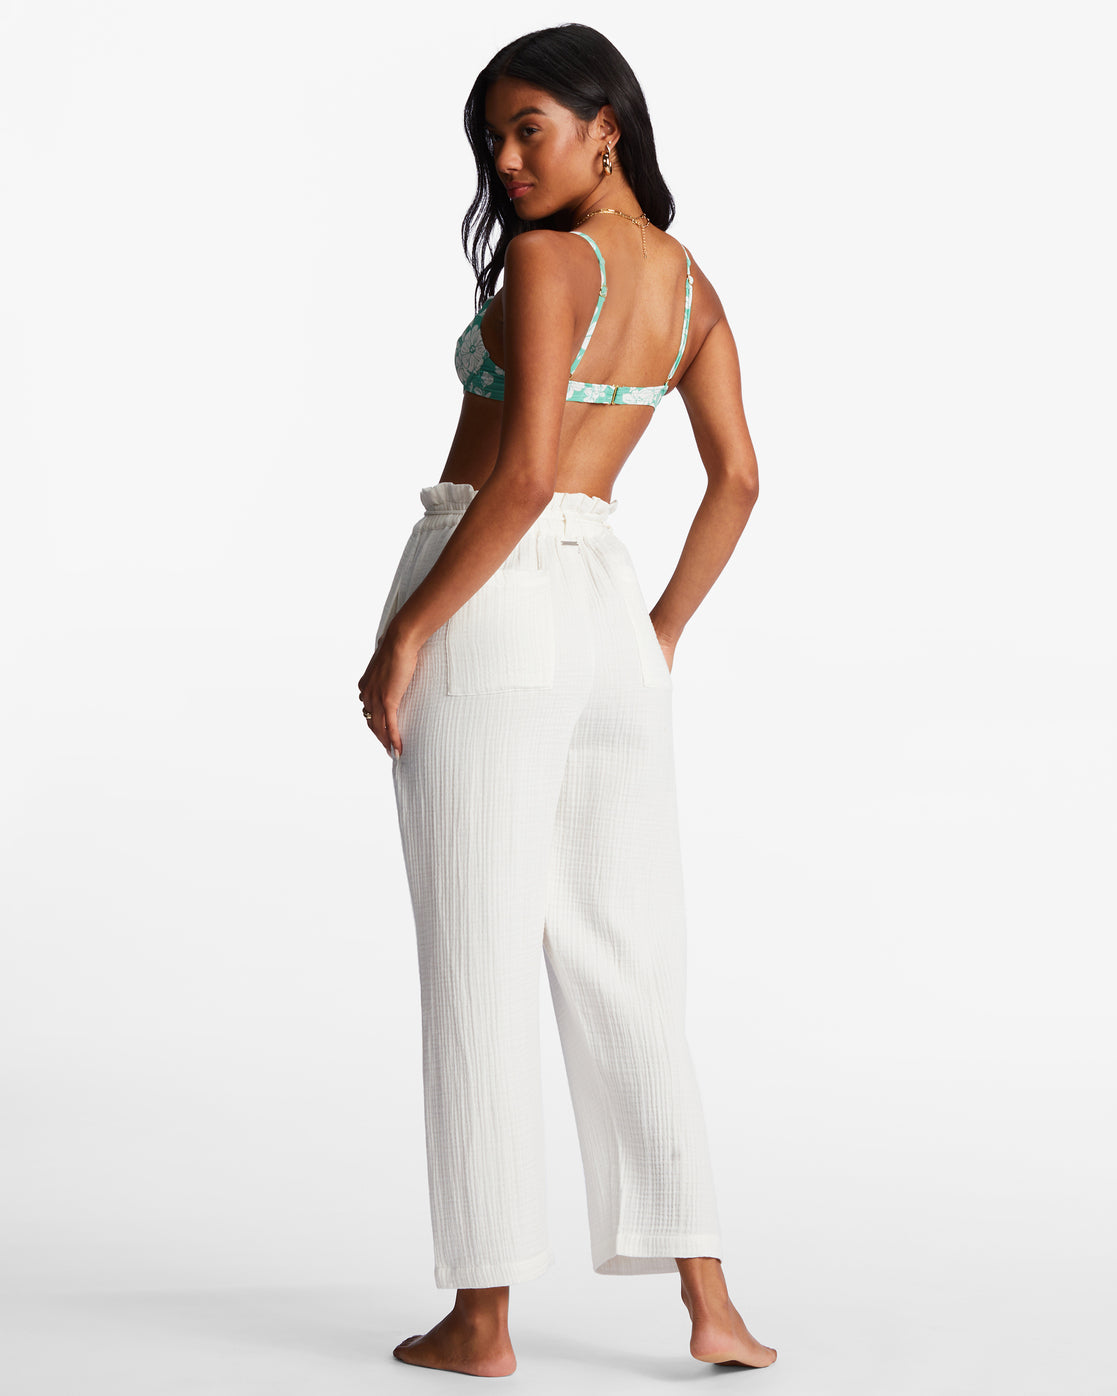 Express | High Waisted White Paperbag Ankle Pant in White | Express Style  Trial